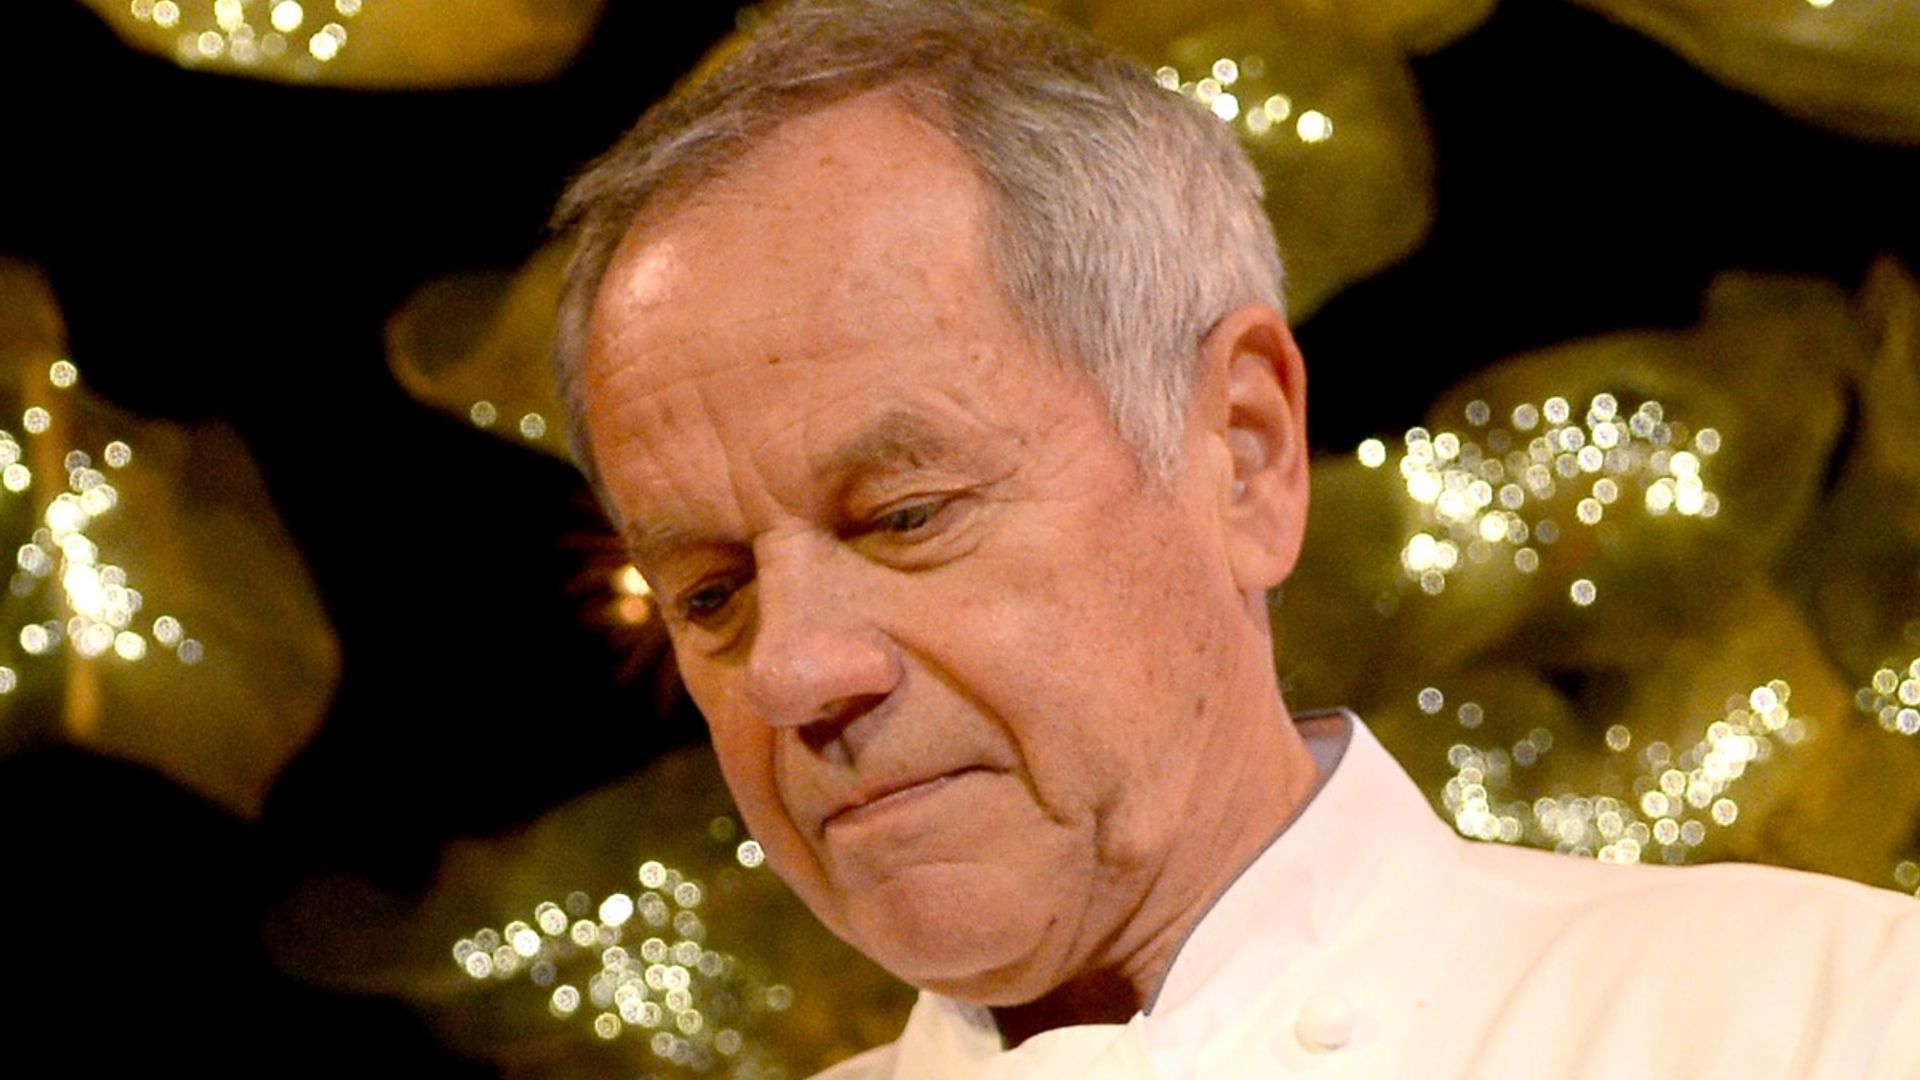 Exclusive: Wolfgang Puck reveals the one item celebrities can't get enough of at the Oscars' party